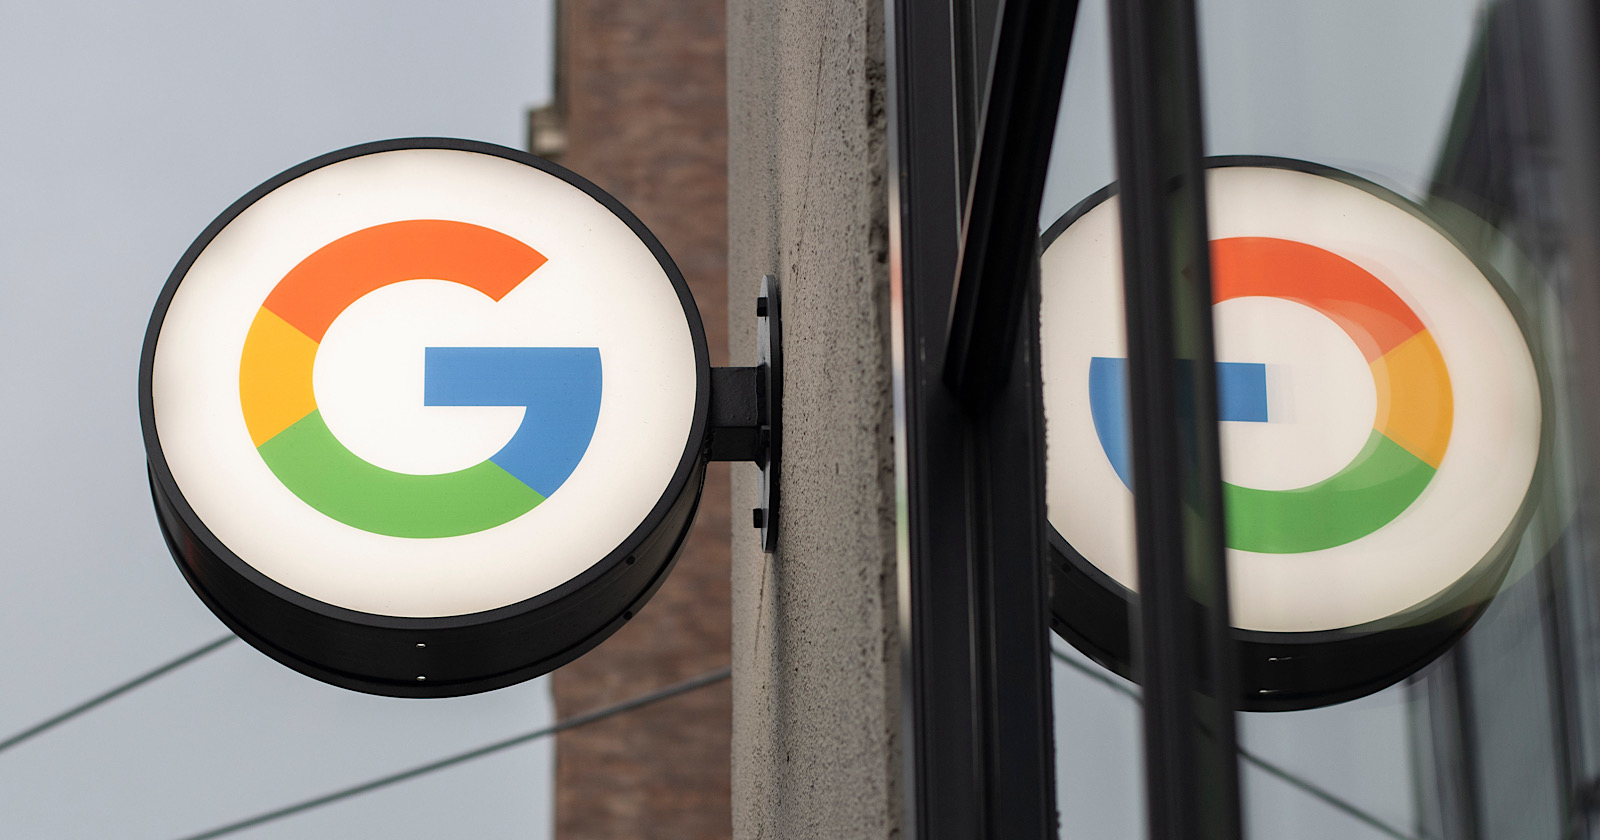 Google's G logo is seen at its Chelsea office in New York City.